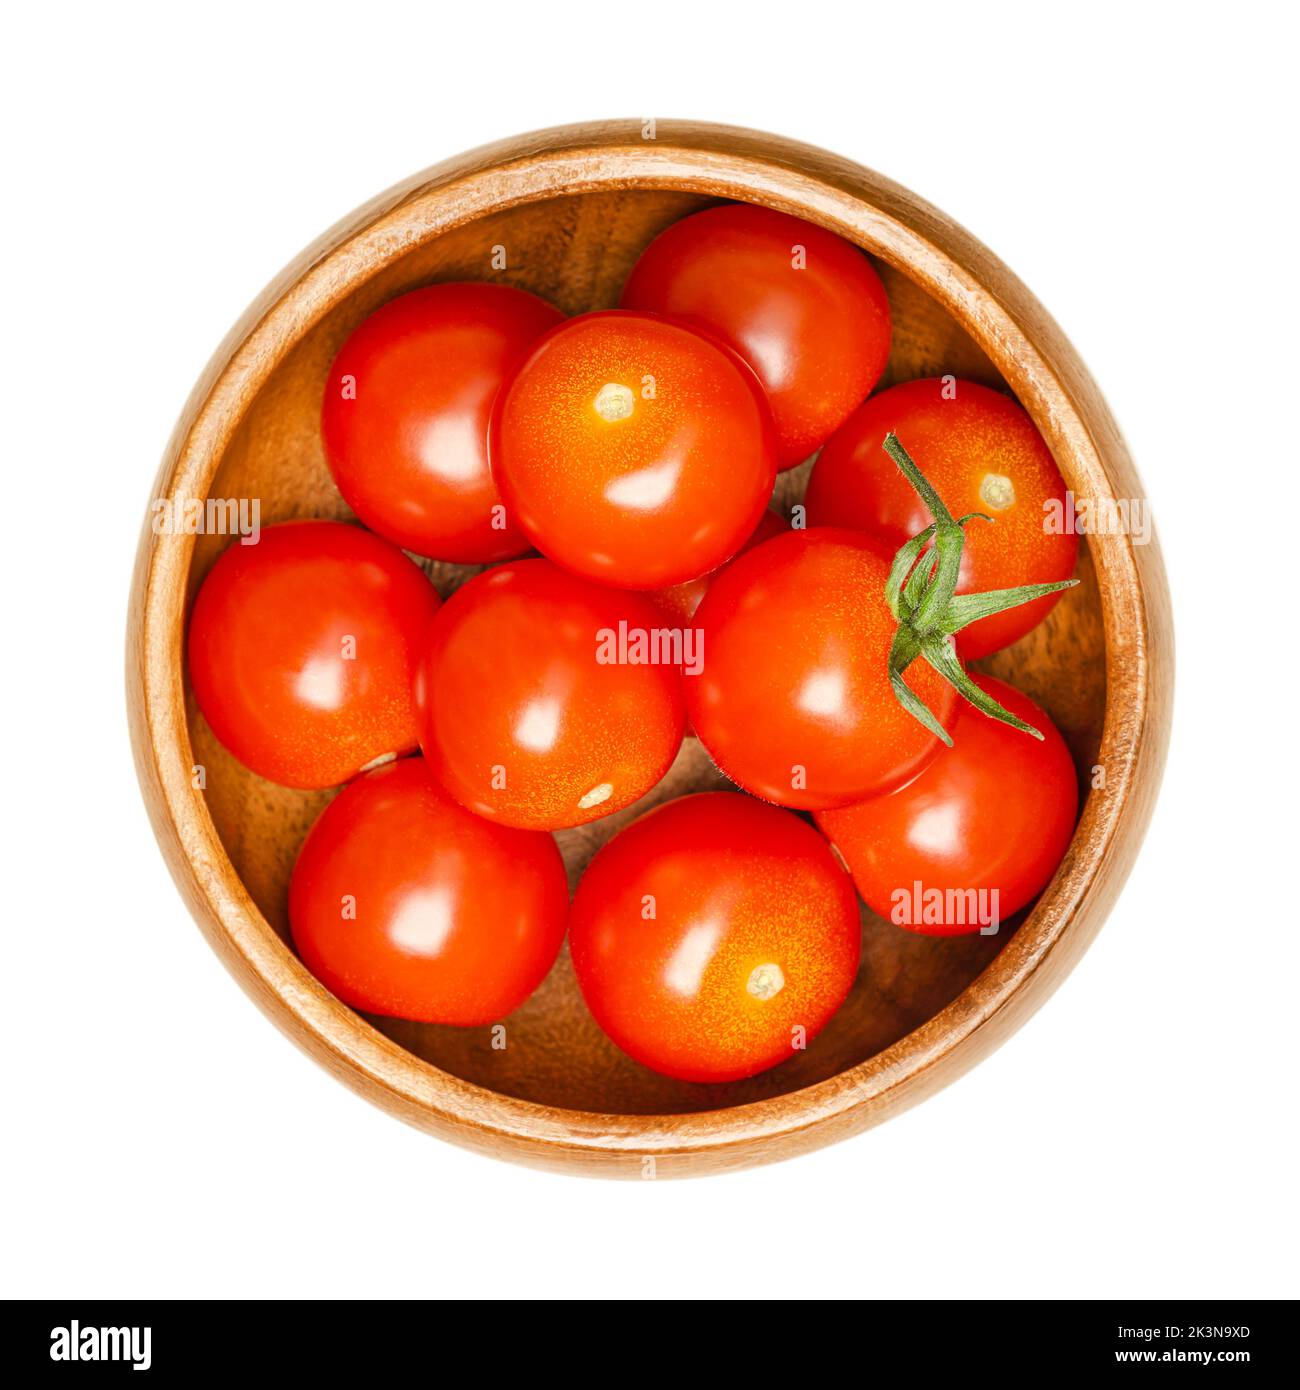 Cherry tomatoes, in a wooden bowl. Fresh and ripe type of red, small and round cocktail tomatoes, Solanum lycopersicum var. cerasiforme. Stock Photo